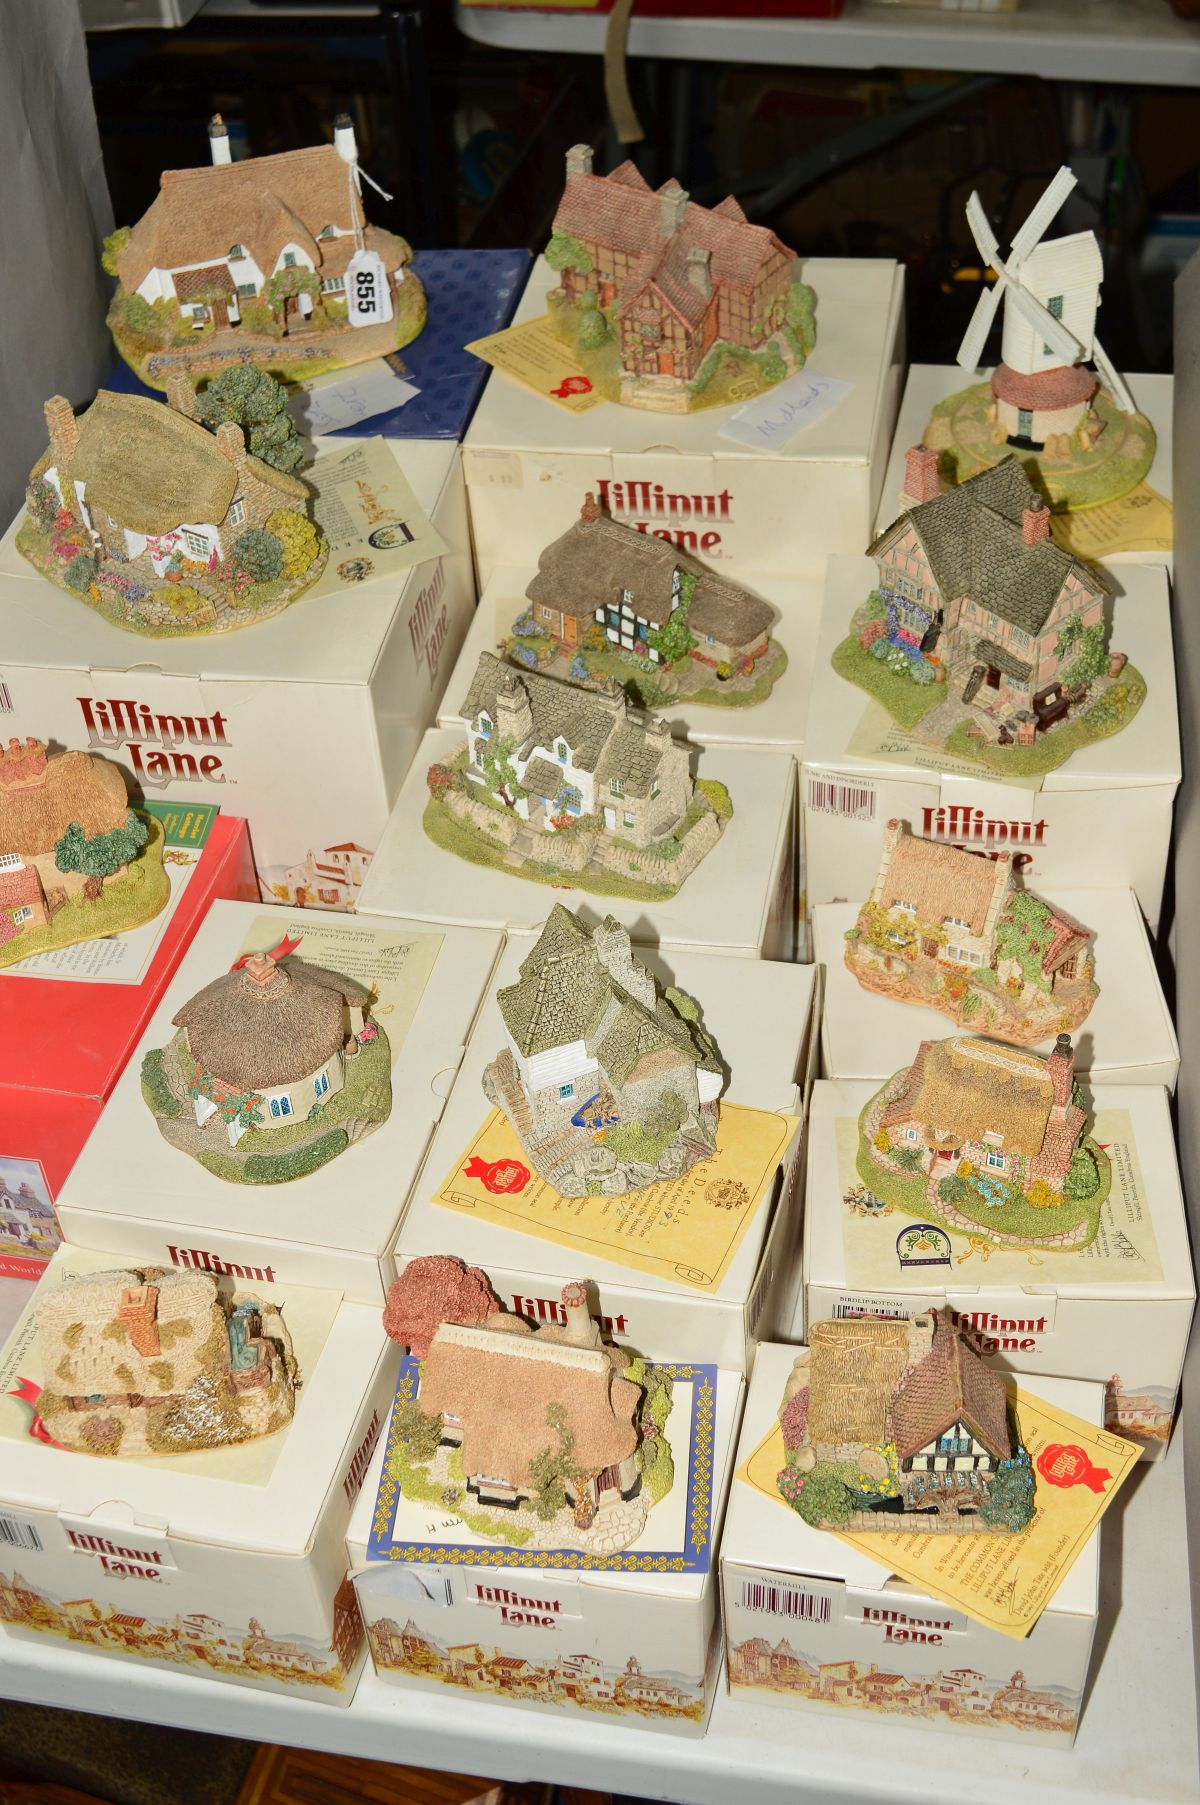 FIFTEEN BOXED LILLIPUT LANE SCULPTURES FROM SOUTH WEST AND MIDLANDS COLLECTION, 'Periwinkle